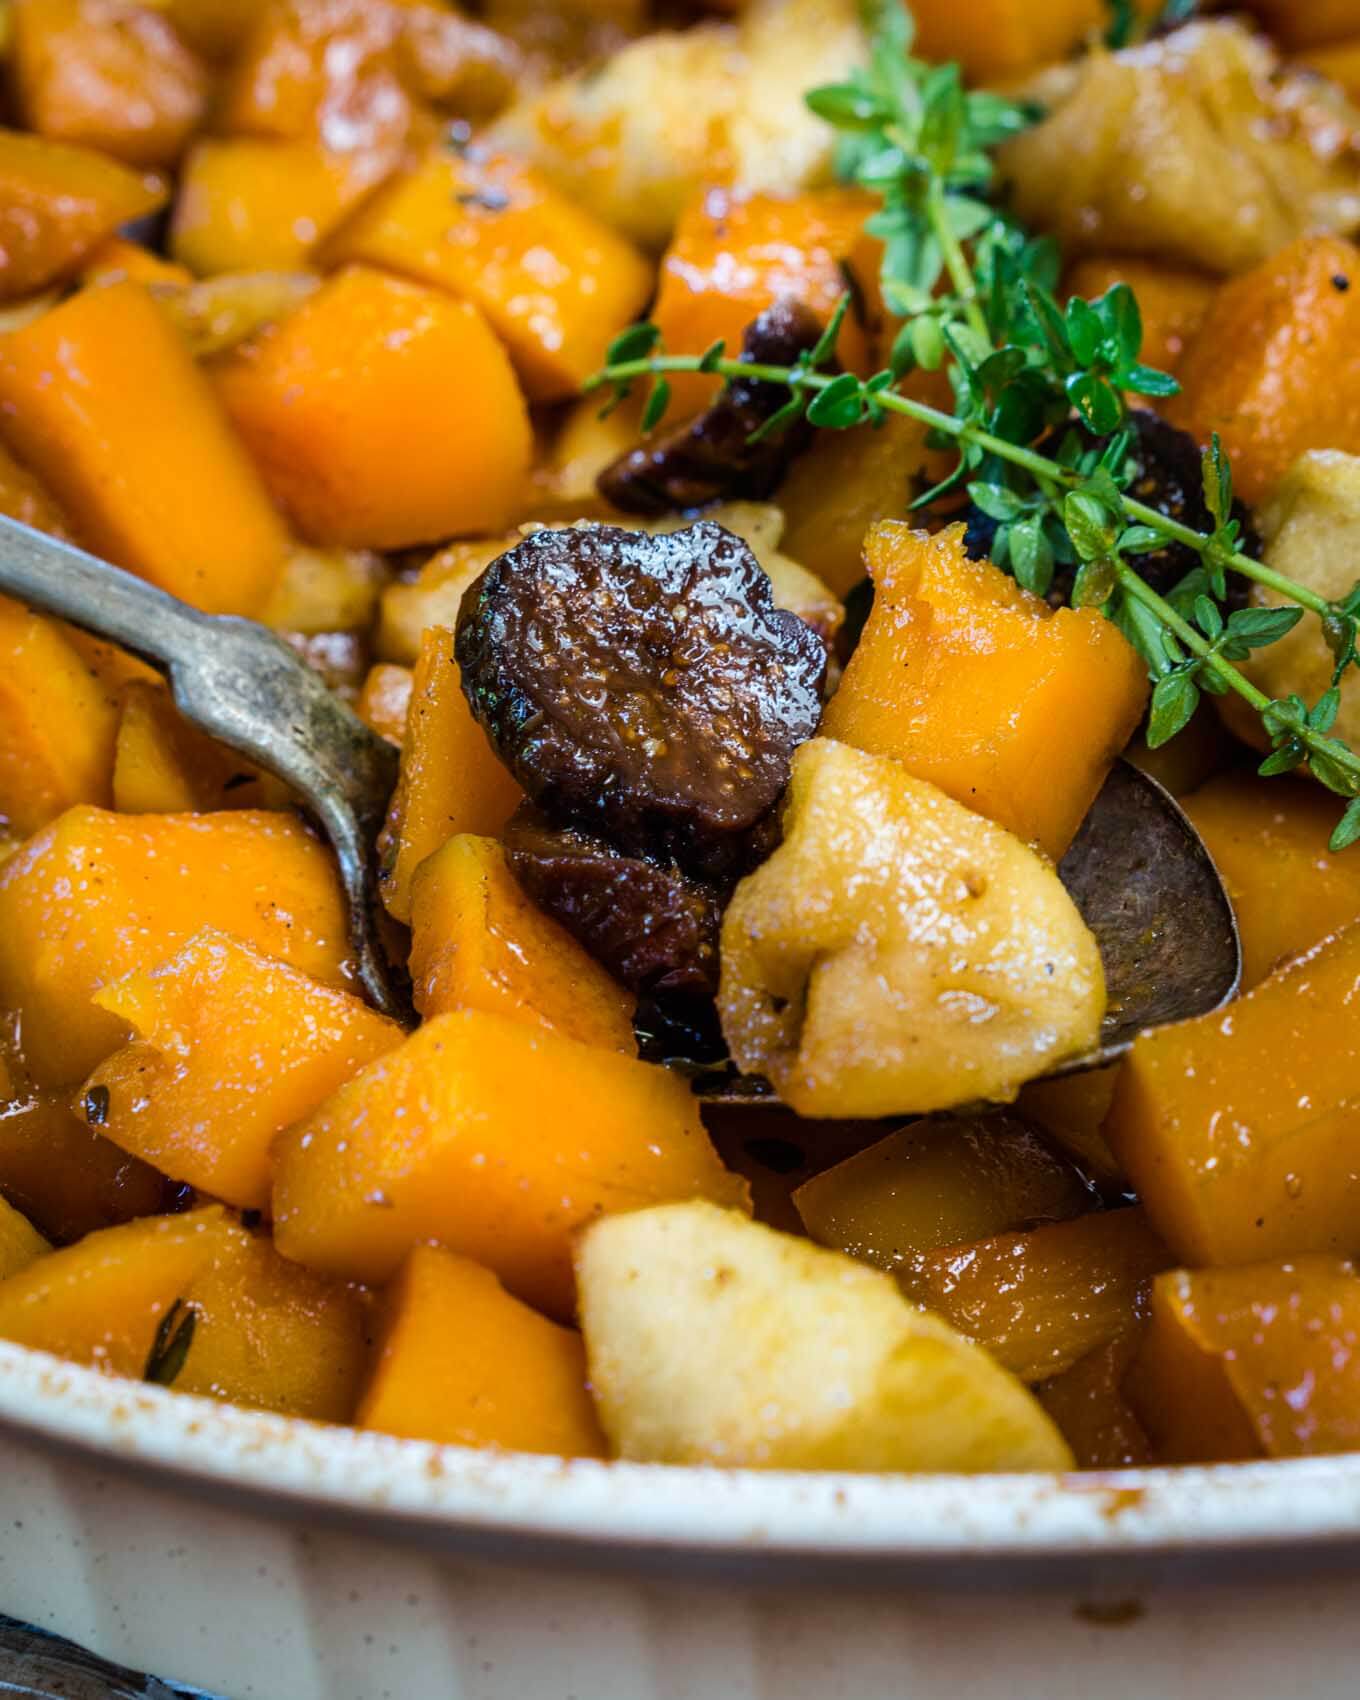 Baked Butternut Squash with Apples and Figs is warm, sweet, and buttery.  It tastes like it's loaded with fat and calories but neither one is welcomed in this dish. It's perfect for a casual dinner or dressed for the holidays because it's easy to put together and everyone will love it. | HostessAtHeart.com